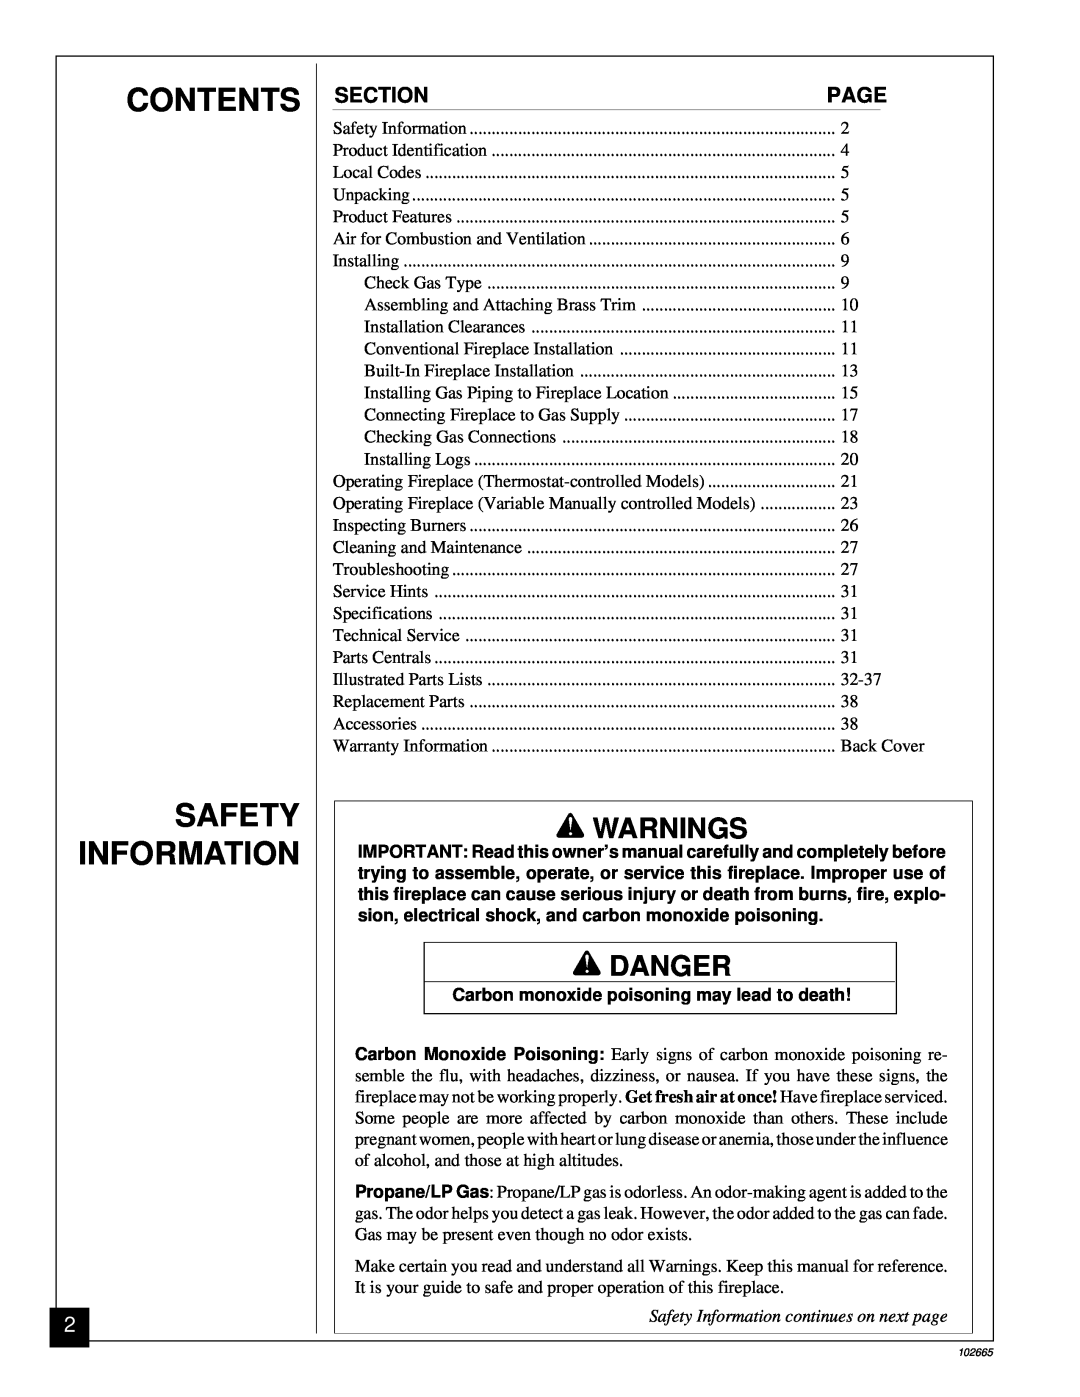 Desa CGF280PT, CGF265PVA Contents Safety Information, Warnings, Danger, Carbon monoxide poisoning may lead to death 